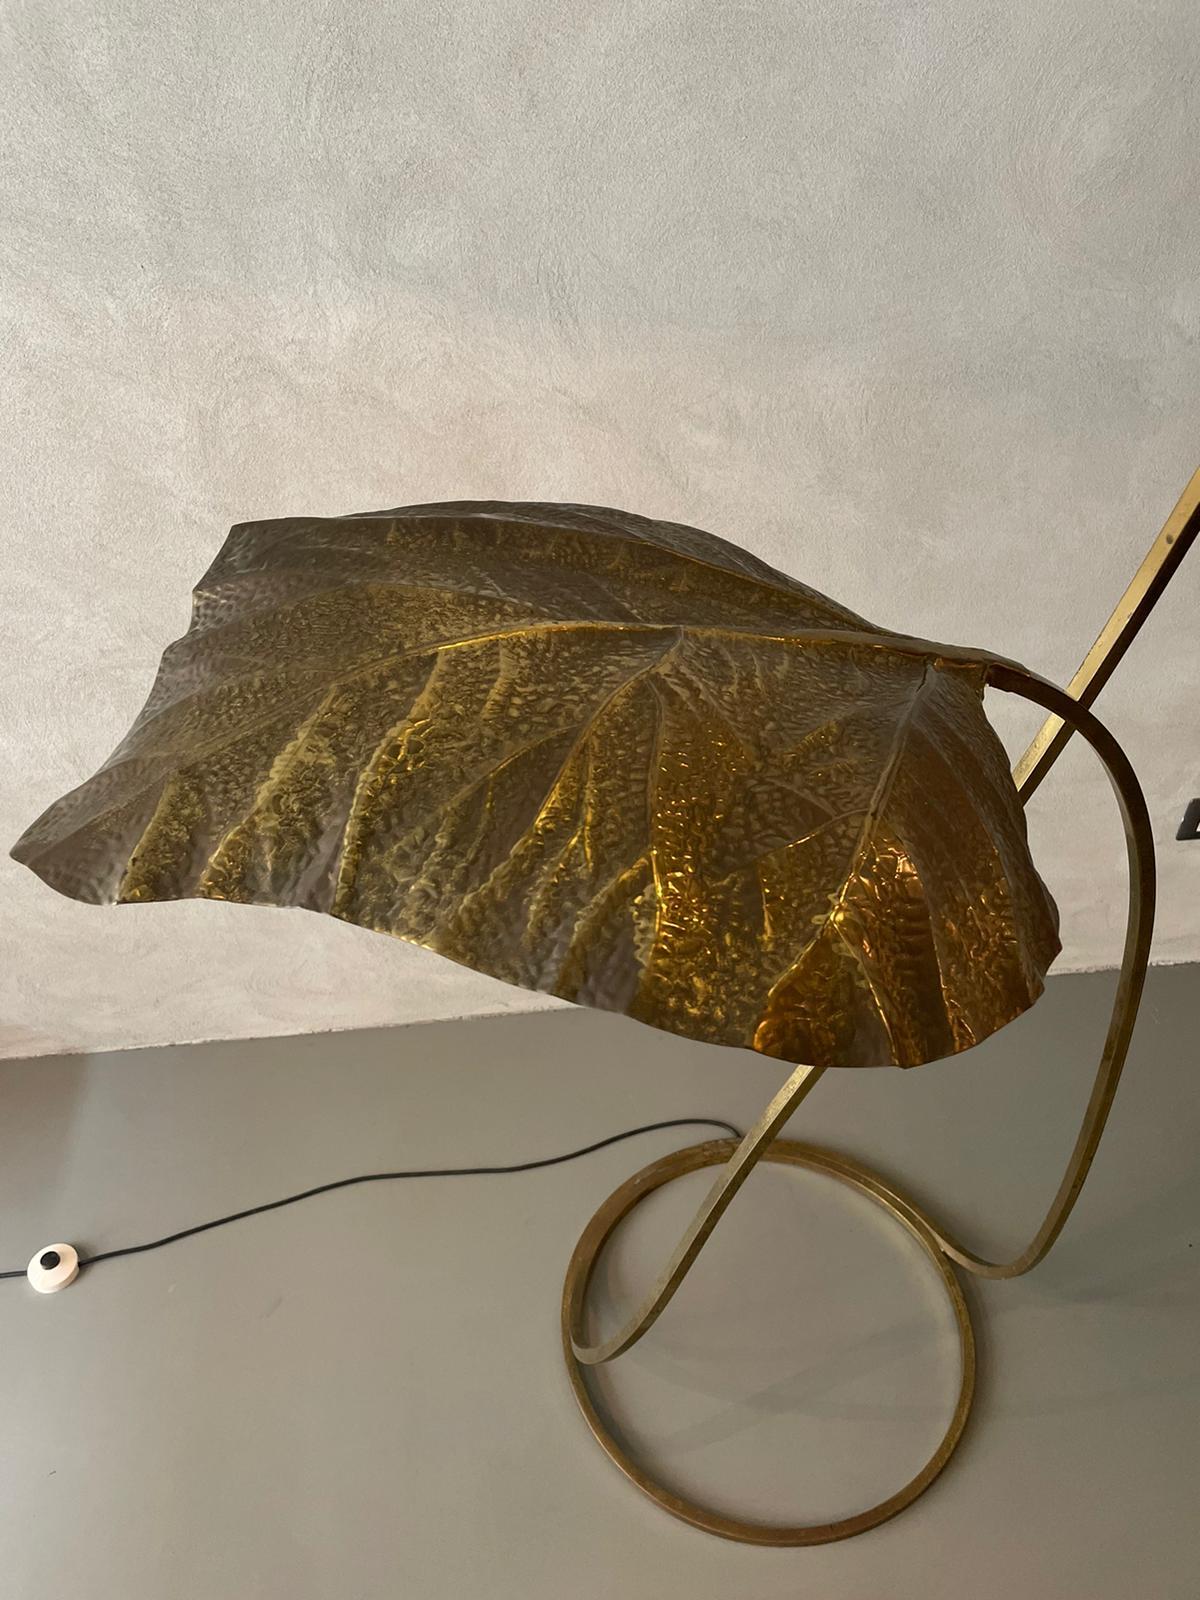 Three-leaf floor lamp by Tommaso Barbi for Bottega Gadda, Italy, 1970.
Hammered brass floor lamp, presenting large rhubarb leaves, smooth brass structure, hammered brass leaves
It's in original conditions.
Excellent vintage patina.

In 1970